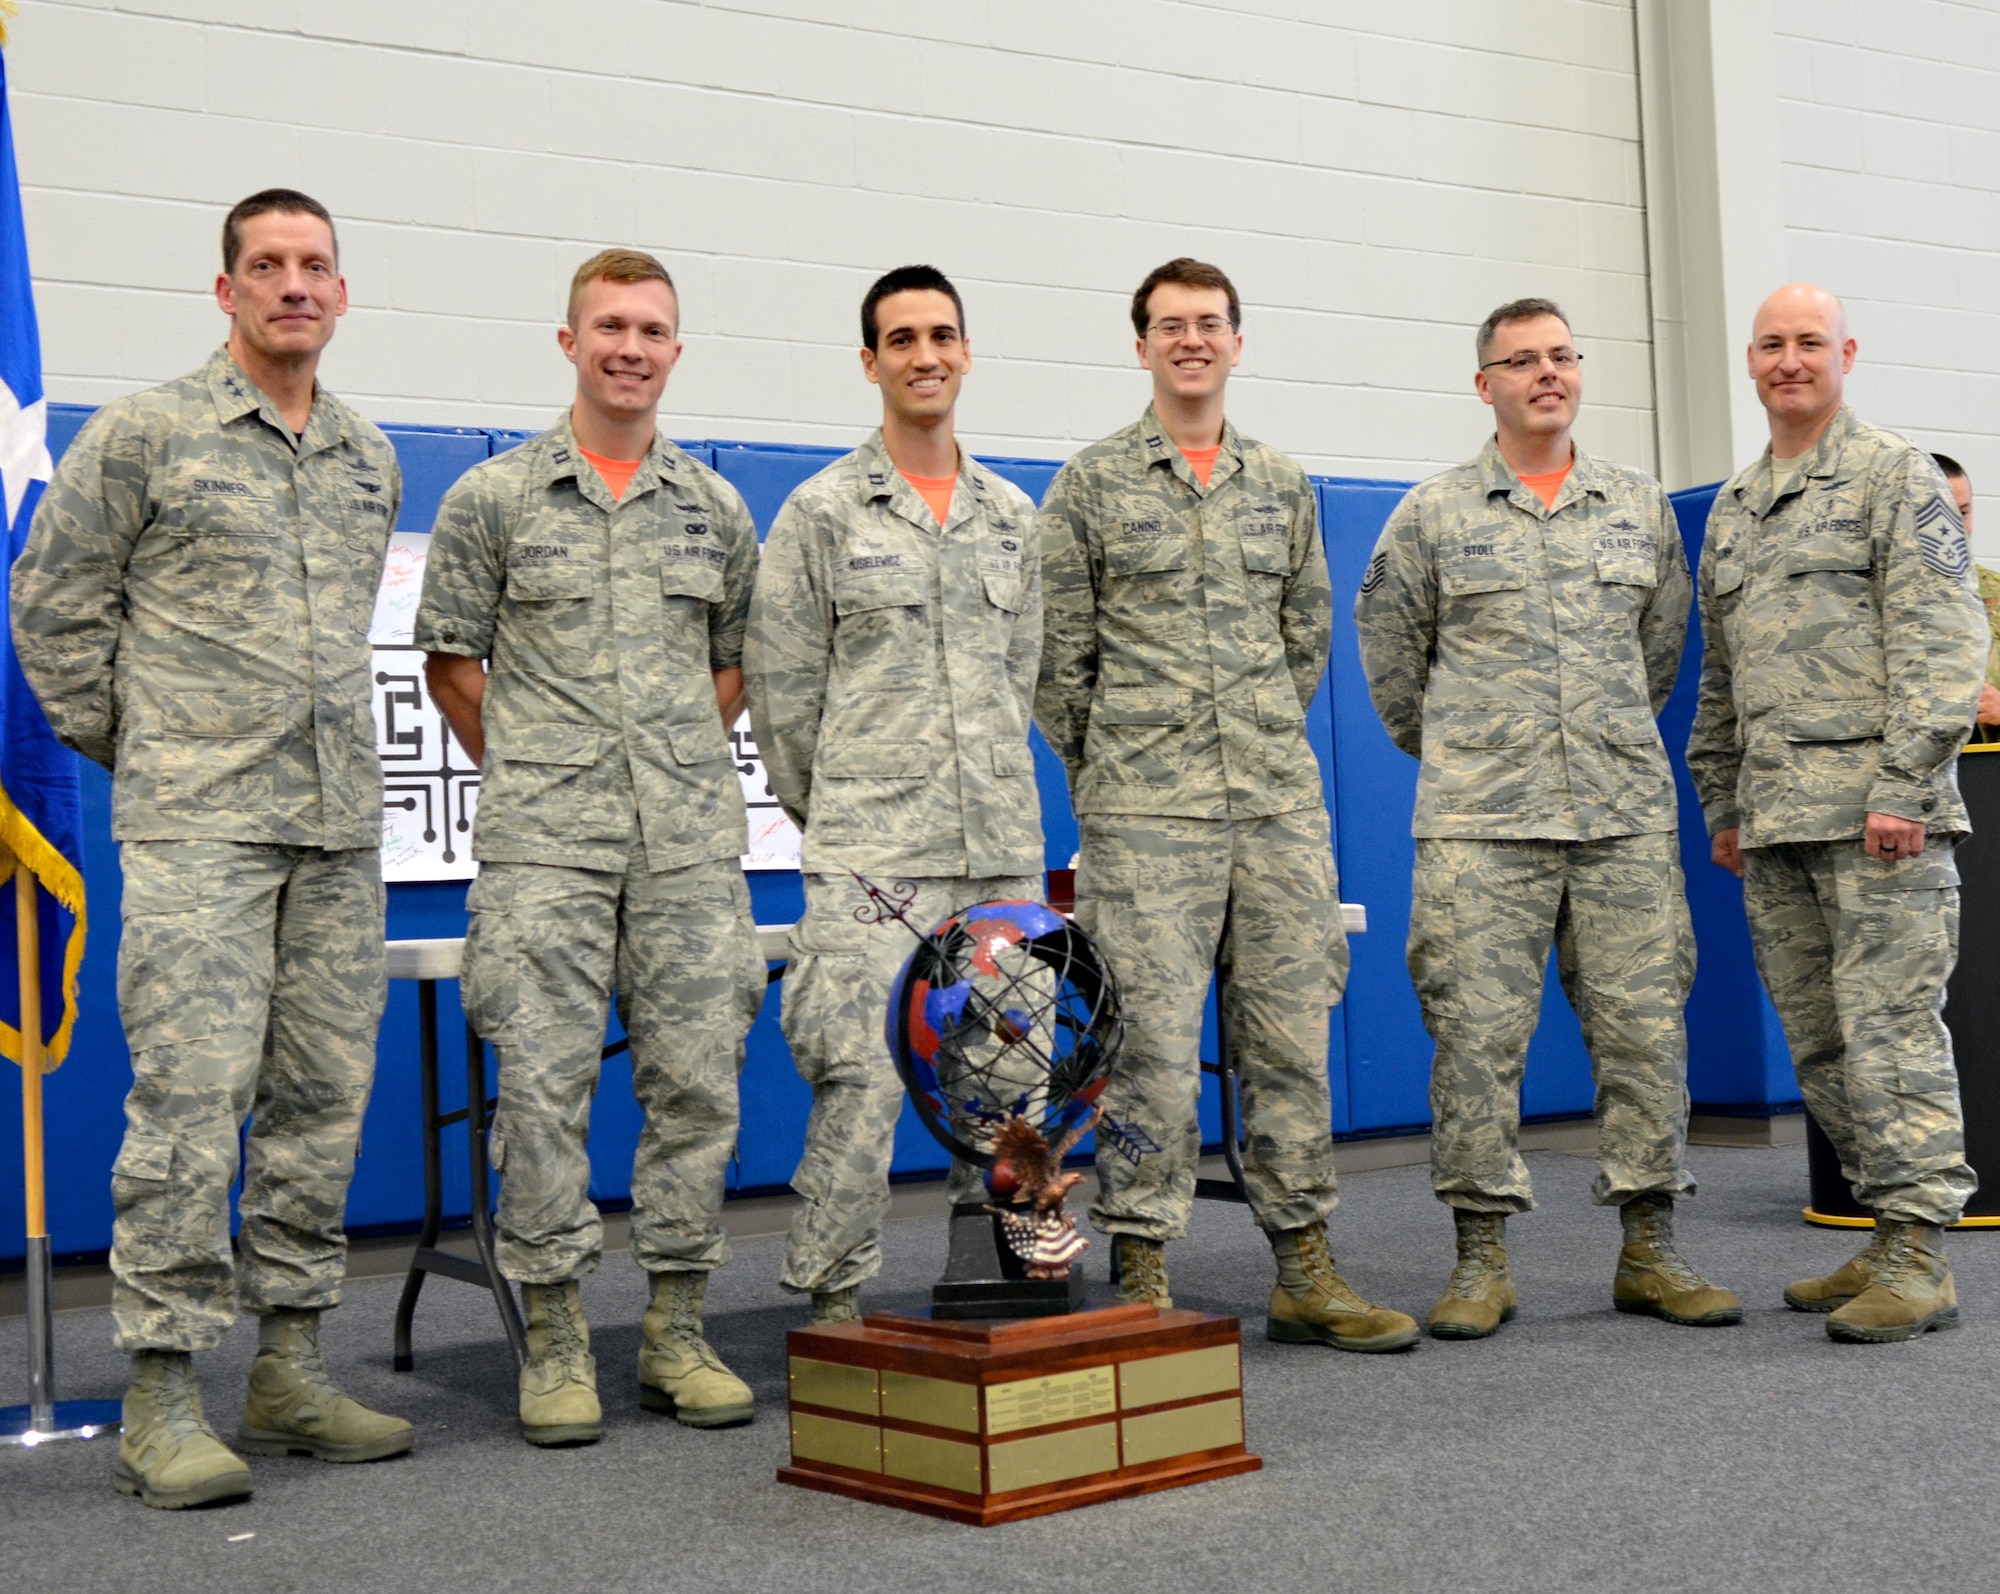 Maj. Gen. Robert Skinner, 24th Air Force commander, and Chief Master Sgt. David Klink, 24th AF command chief, pose for a photo with the 24th AF Cyber Competition unit team winner in San Antonio, Texas, June 7, 2019. The team, from the 390th Cyberspace Operations Squadron, included Capts. Paul Jordan, David Musielewicz and Anthony Canino, and Tech. Sgt. Zachary Stoll. (U.S. Air Force photo by Rachel Jones)